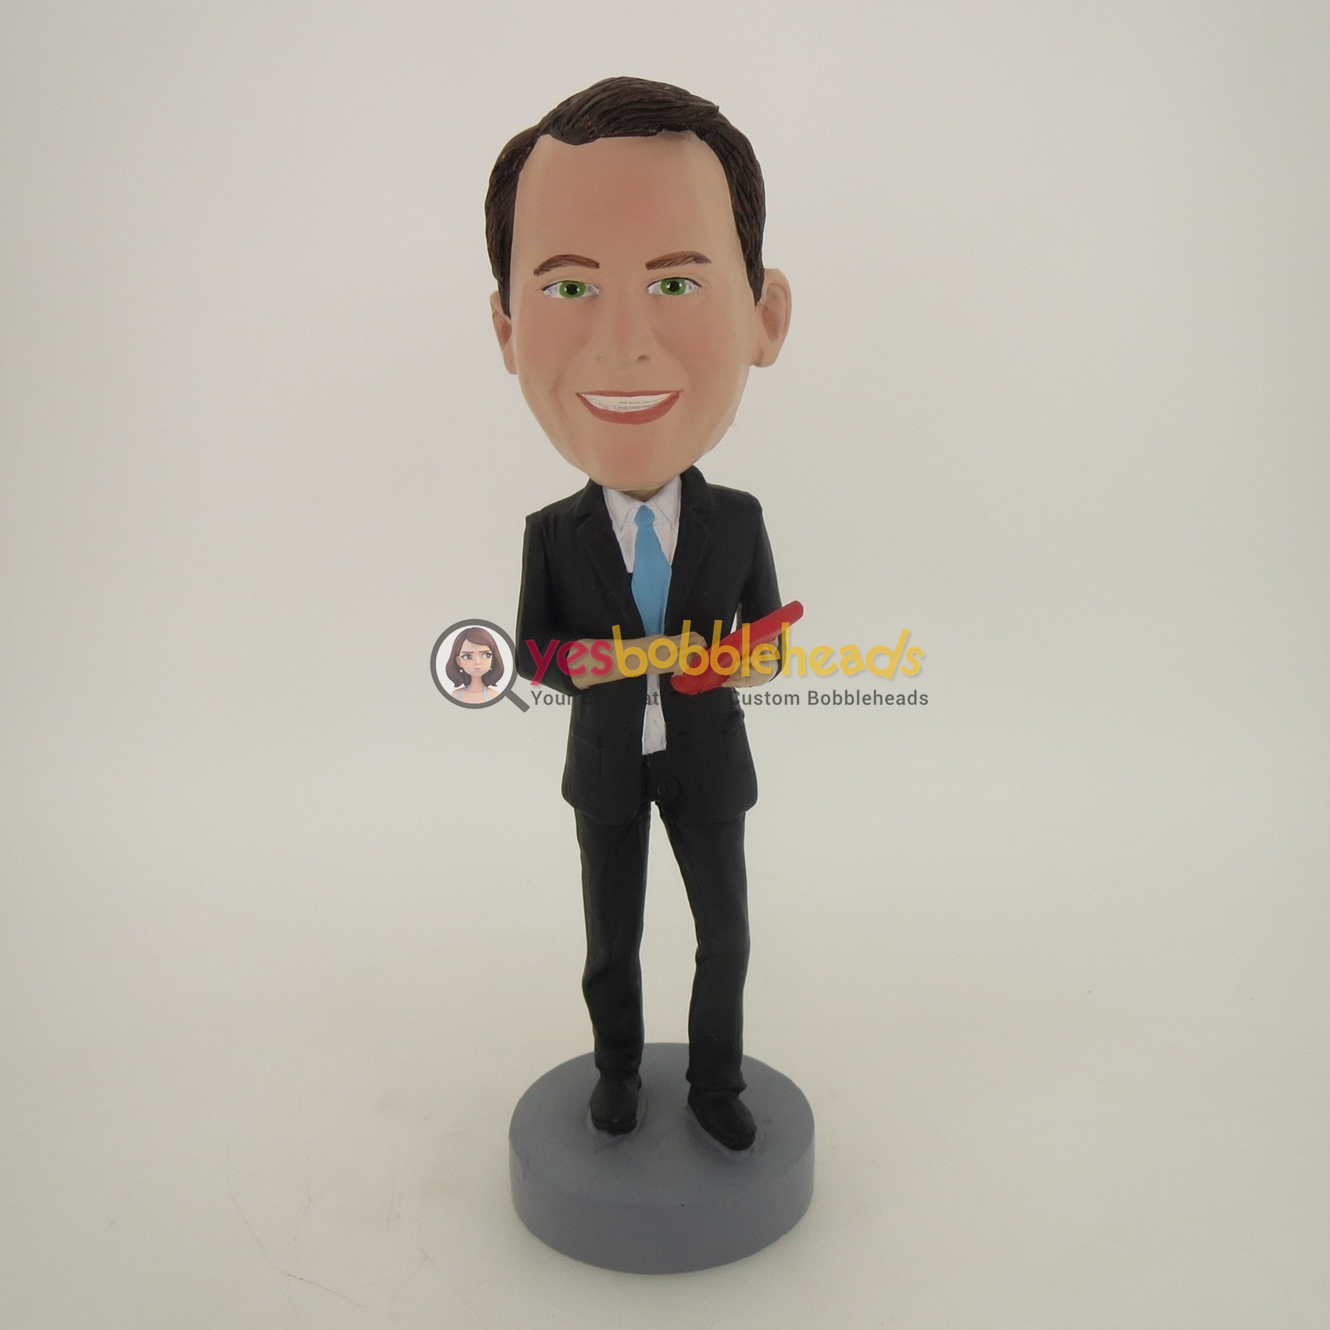 Picture of Custom Bobblehead Doll: Smart Business Man